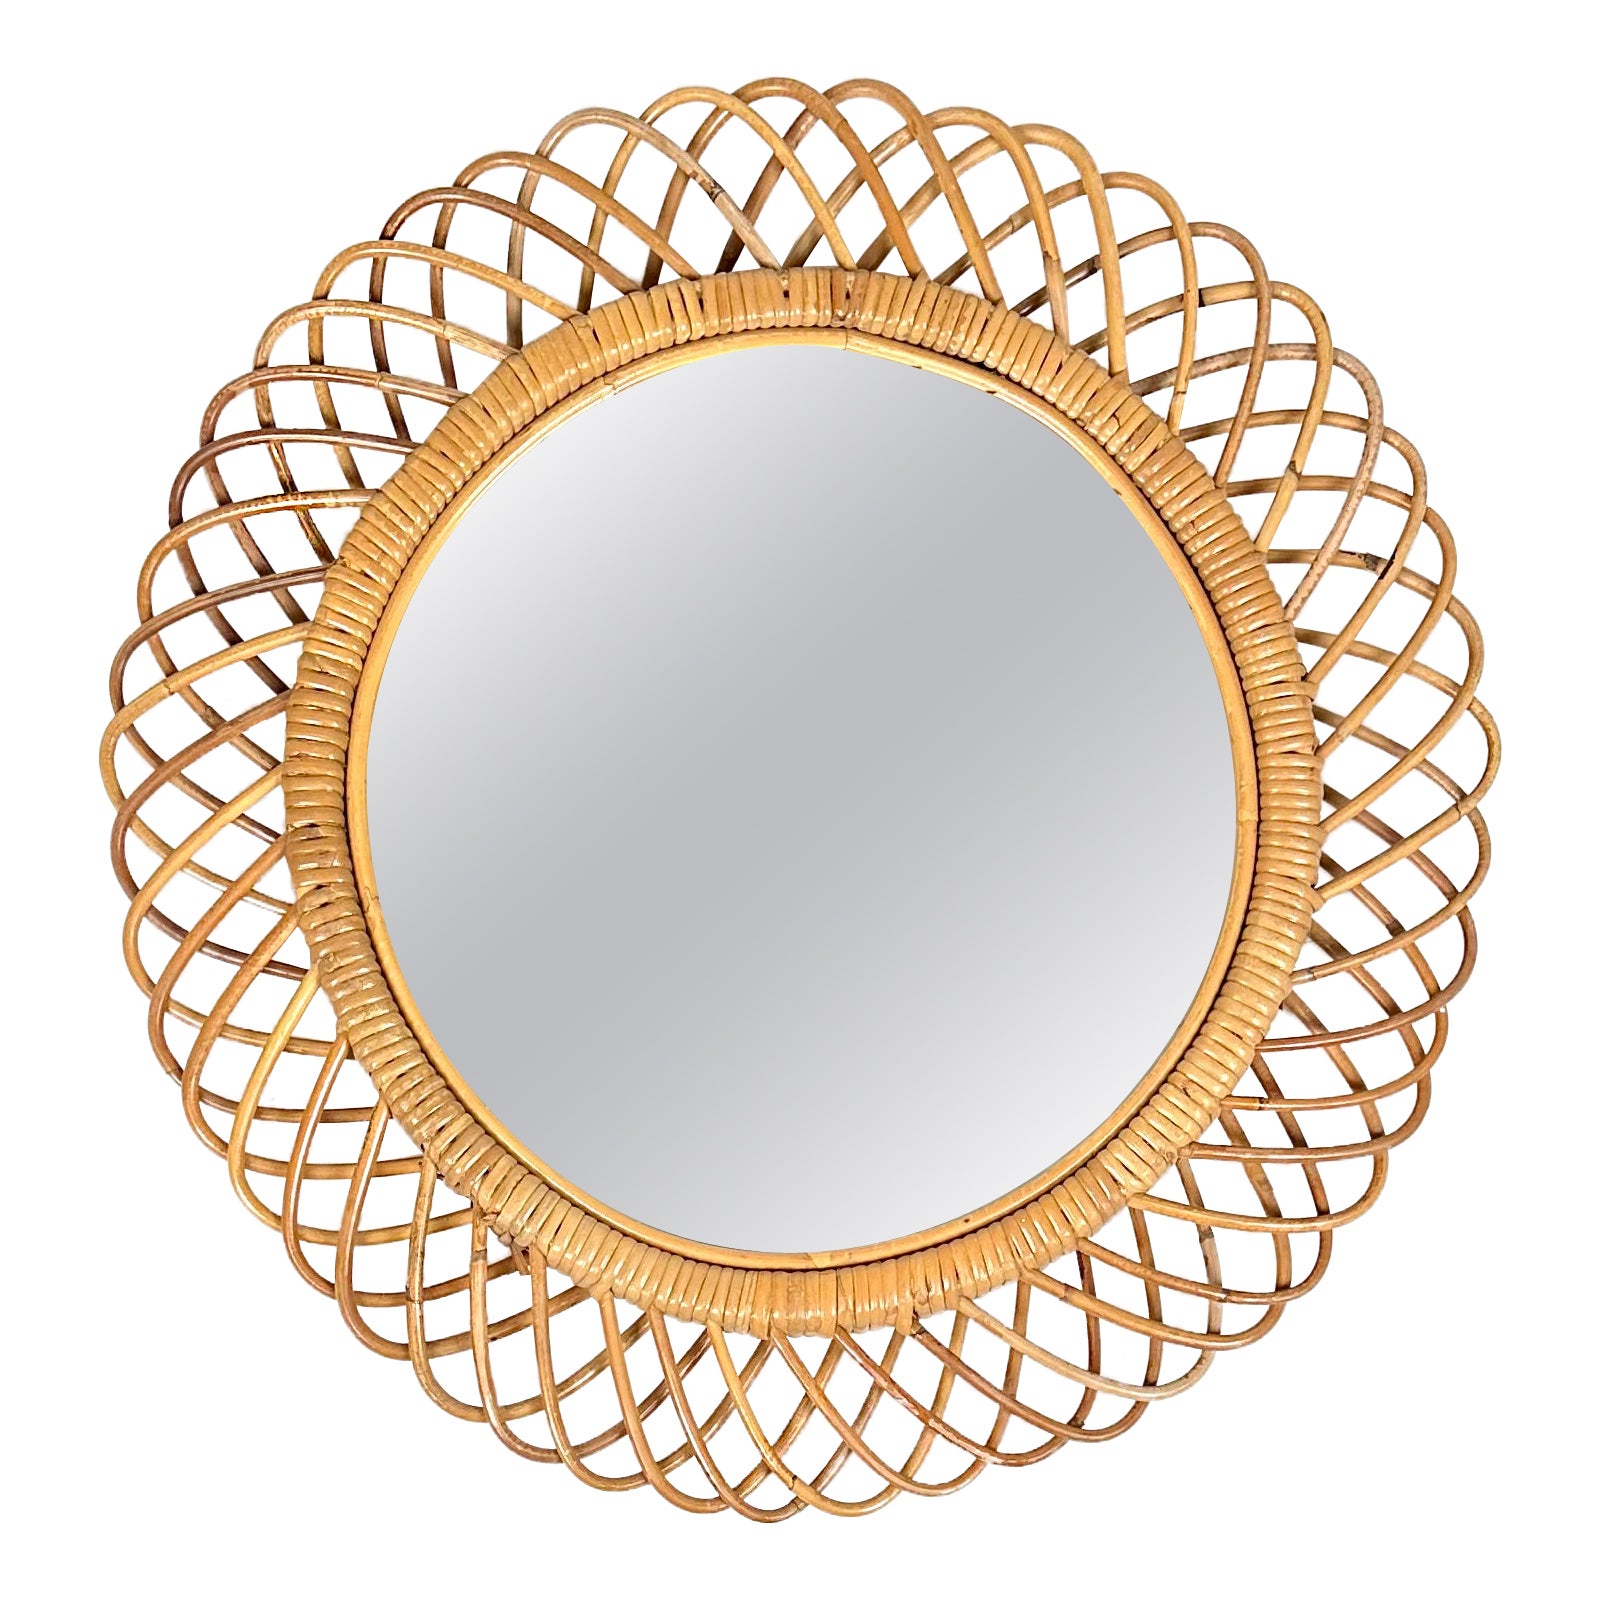 Midcentury Rattan and Bamboo Round Wall Mirror, Italy, 1960s For Sale